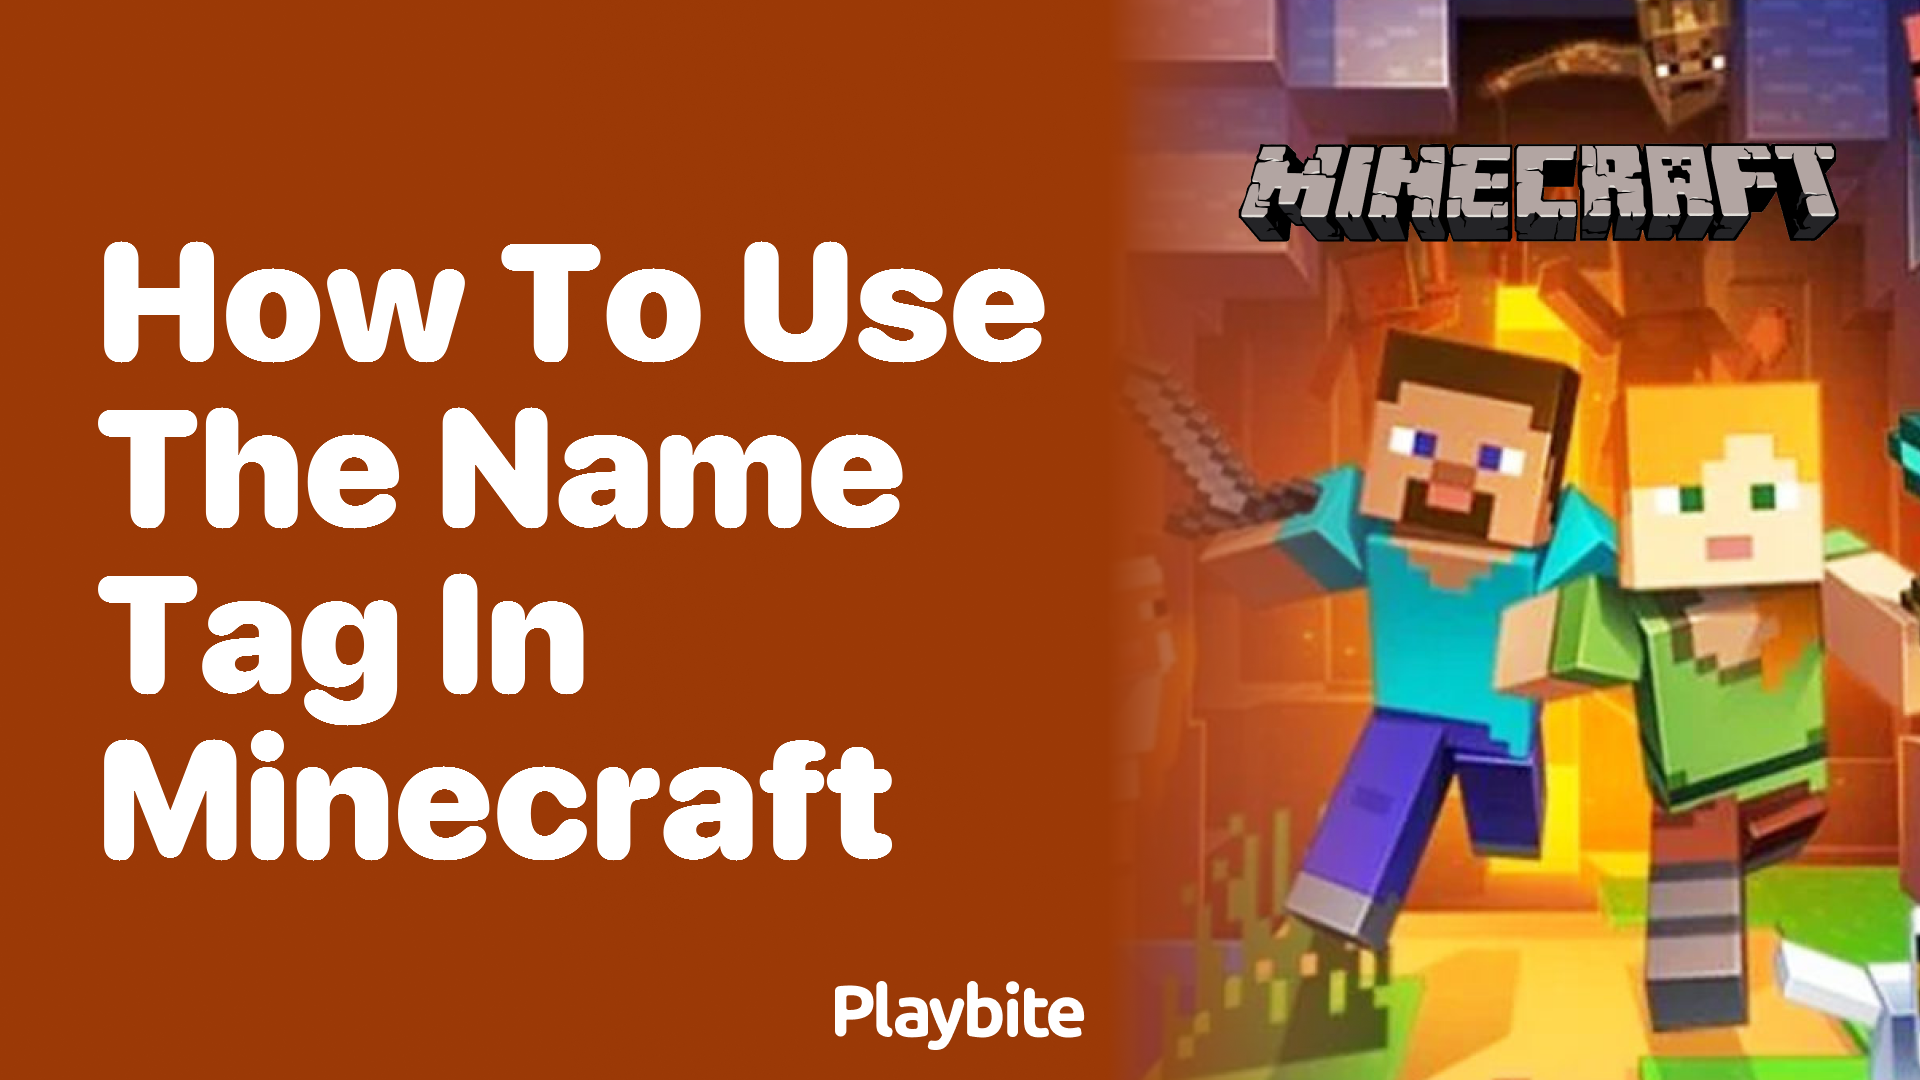 How to Use the Name Tag in Minecraft - Playbite